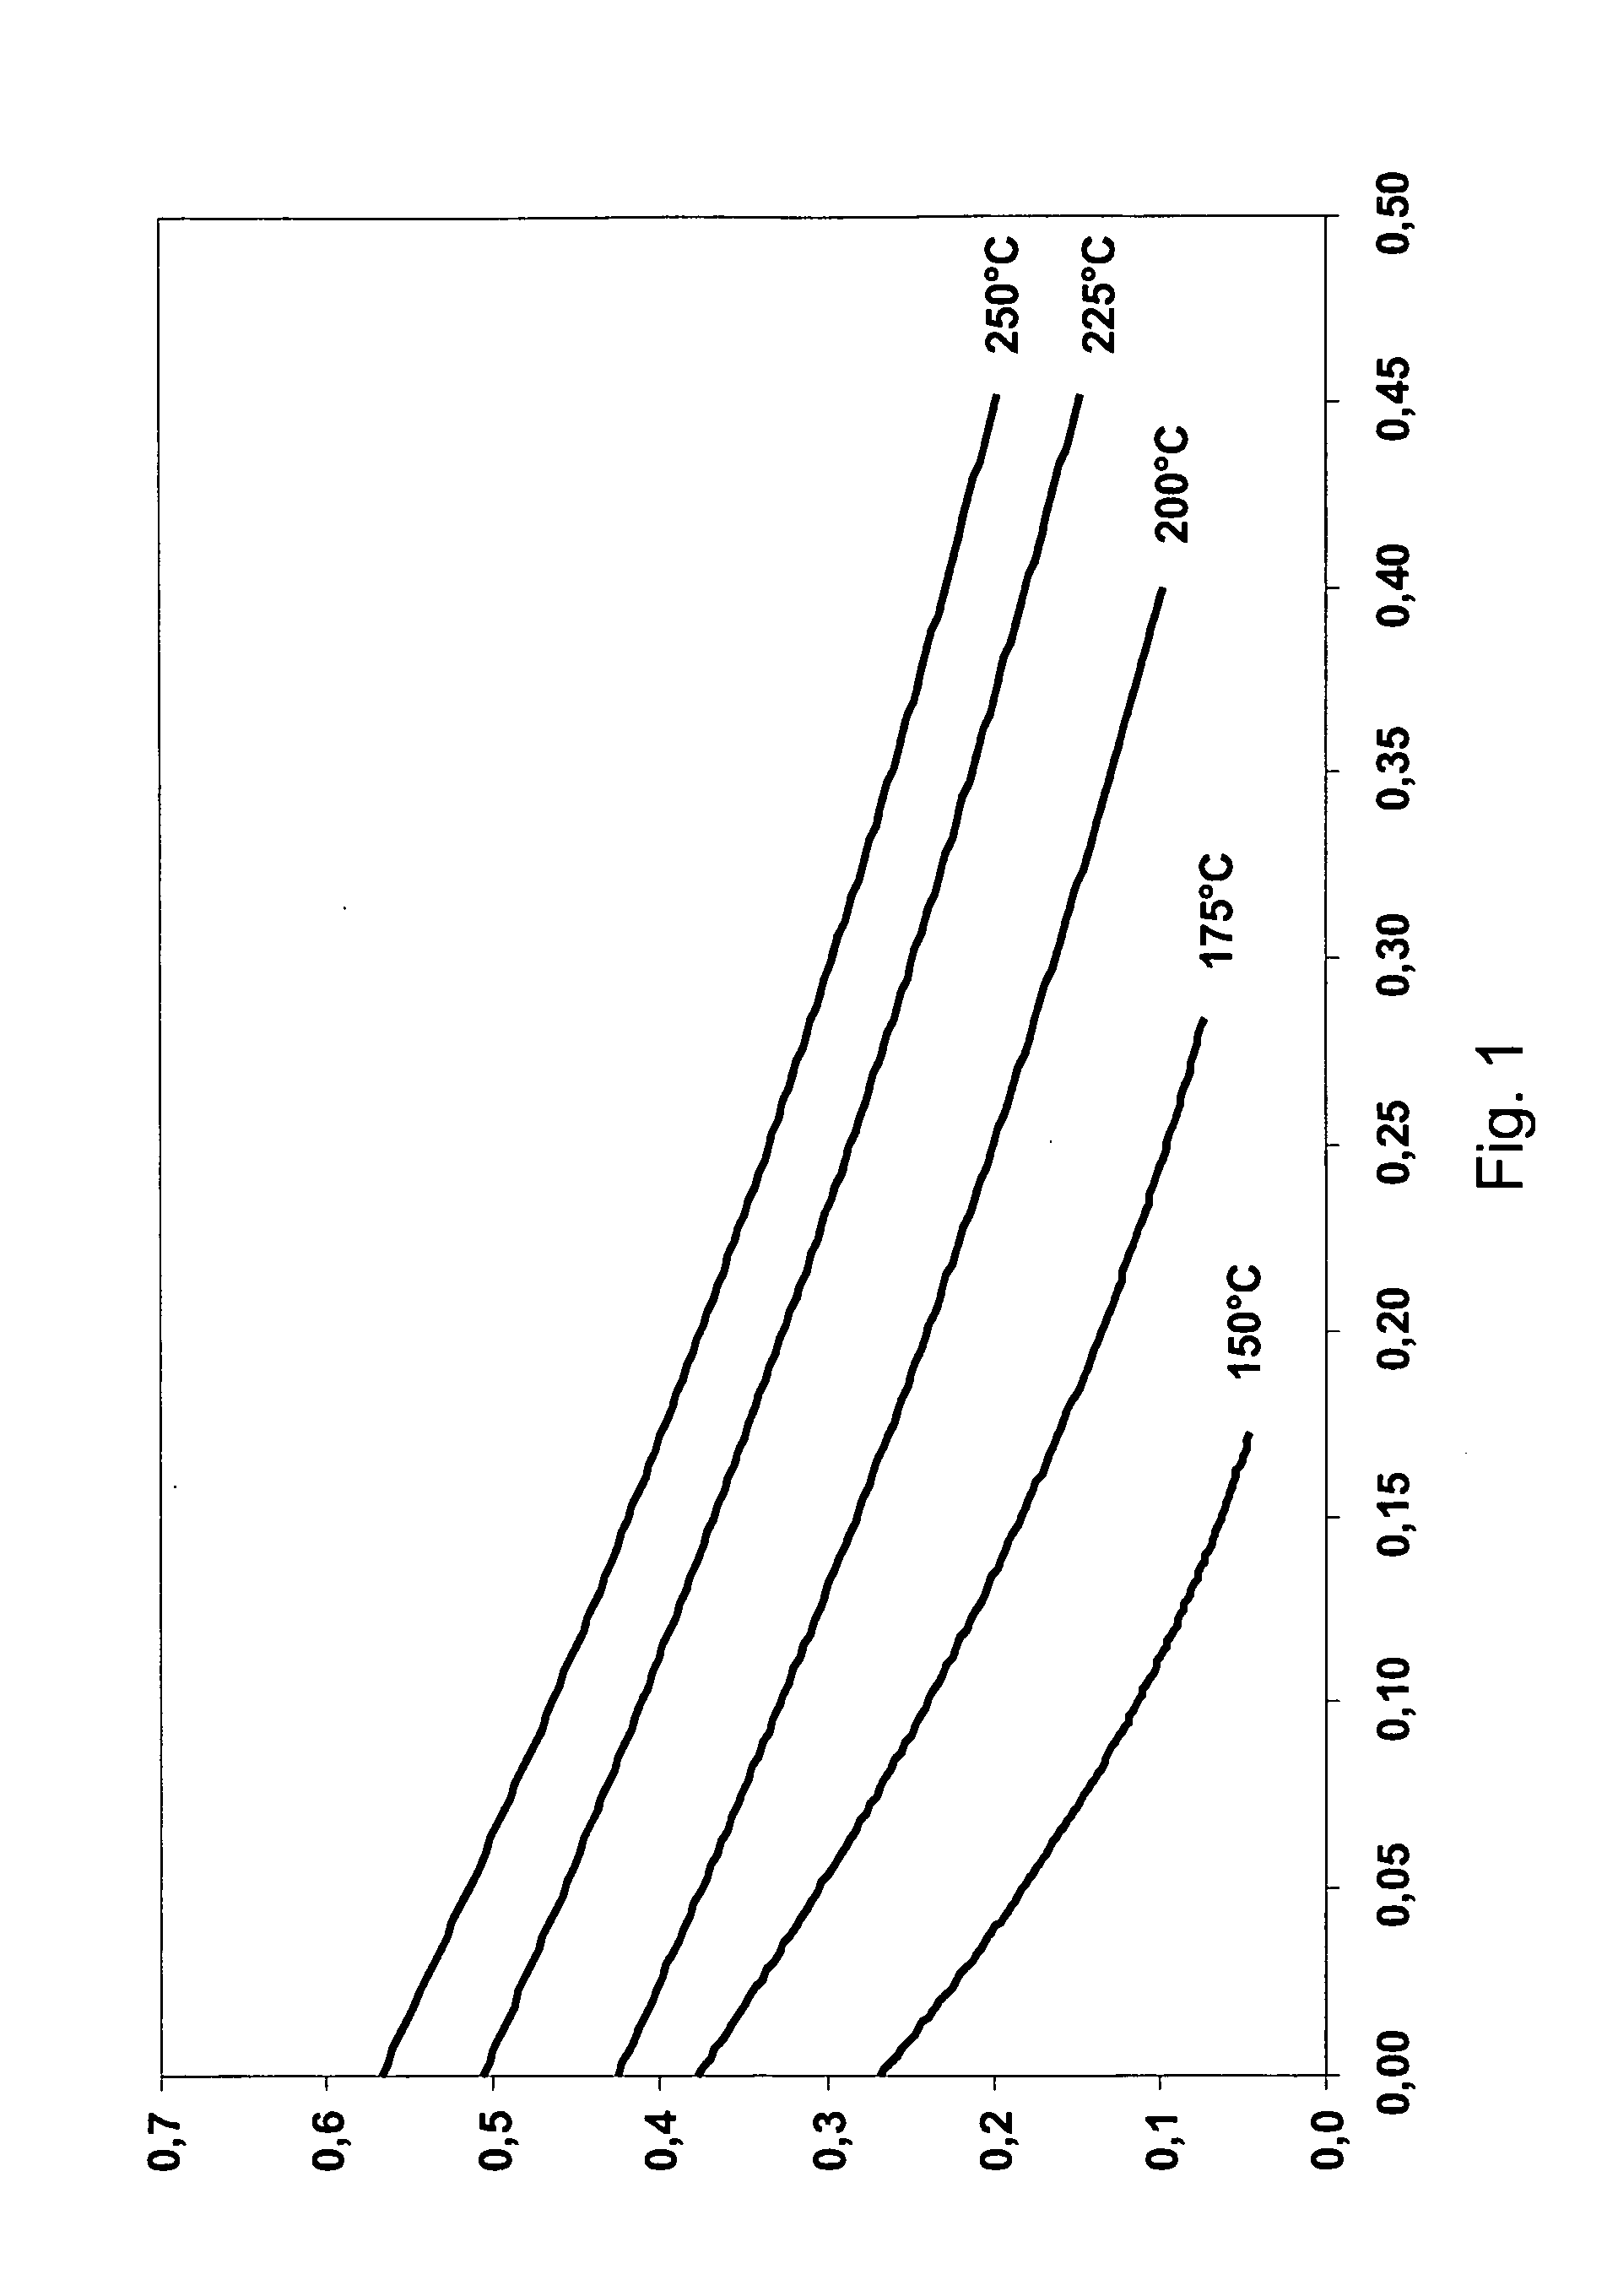 Method of operating a direct dme fuel cell system